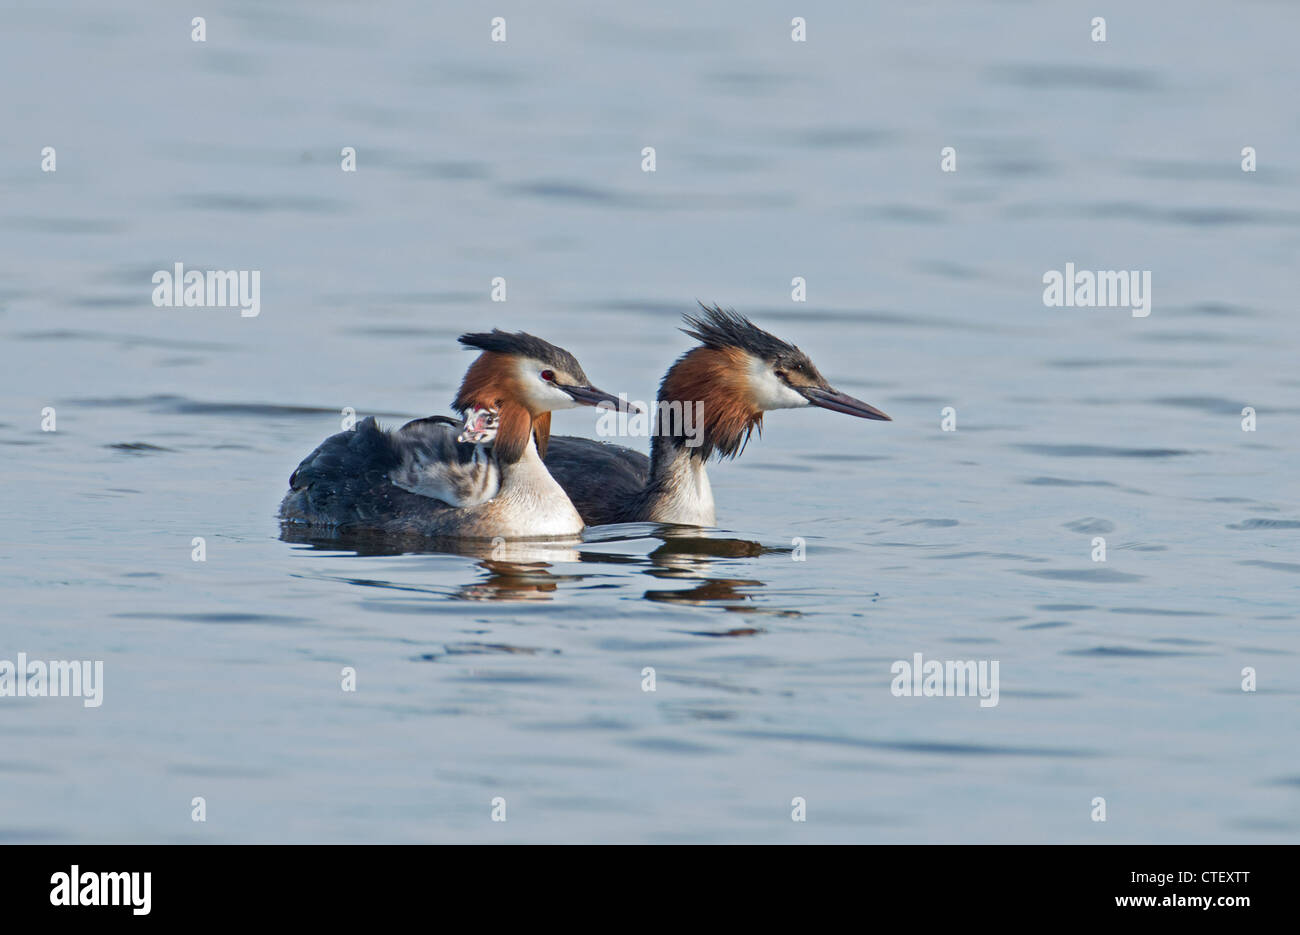 GREAT CRESTED GREBES Podiceps cristatus WITH CHICK. Stock Photo